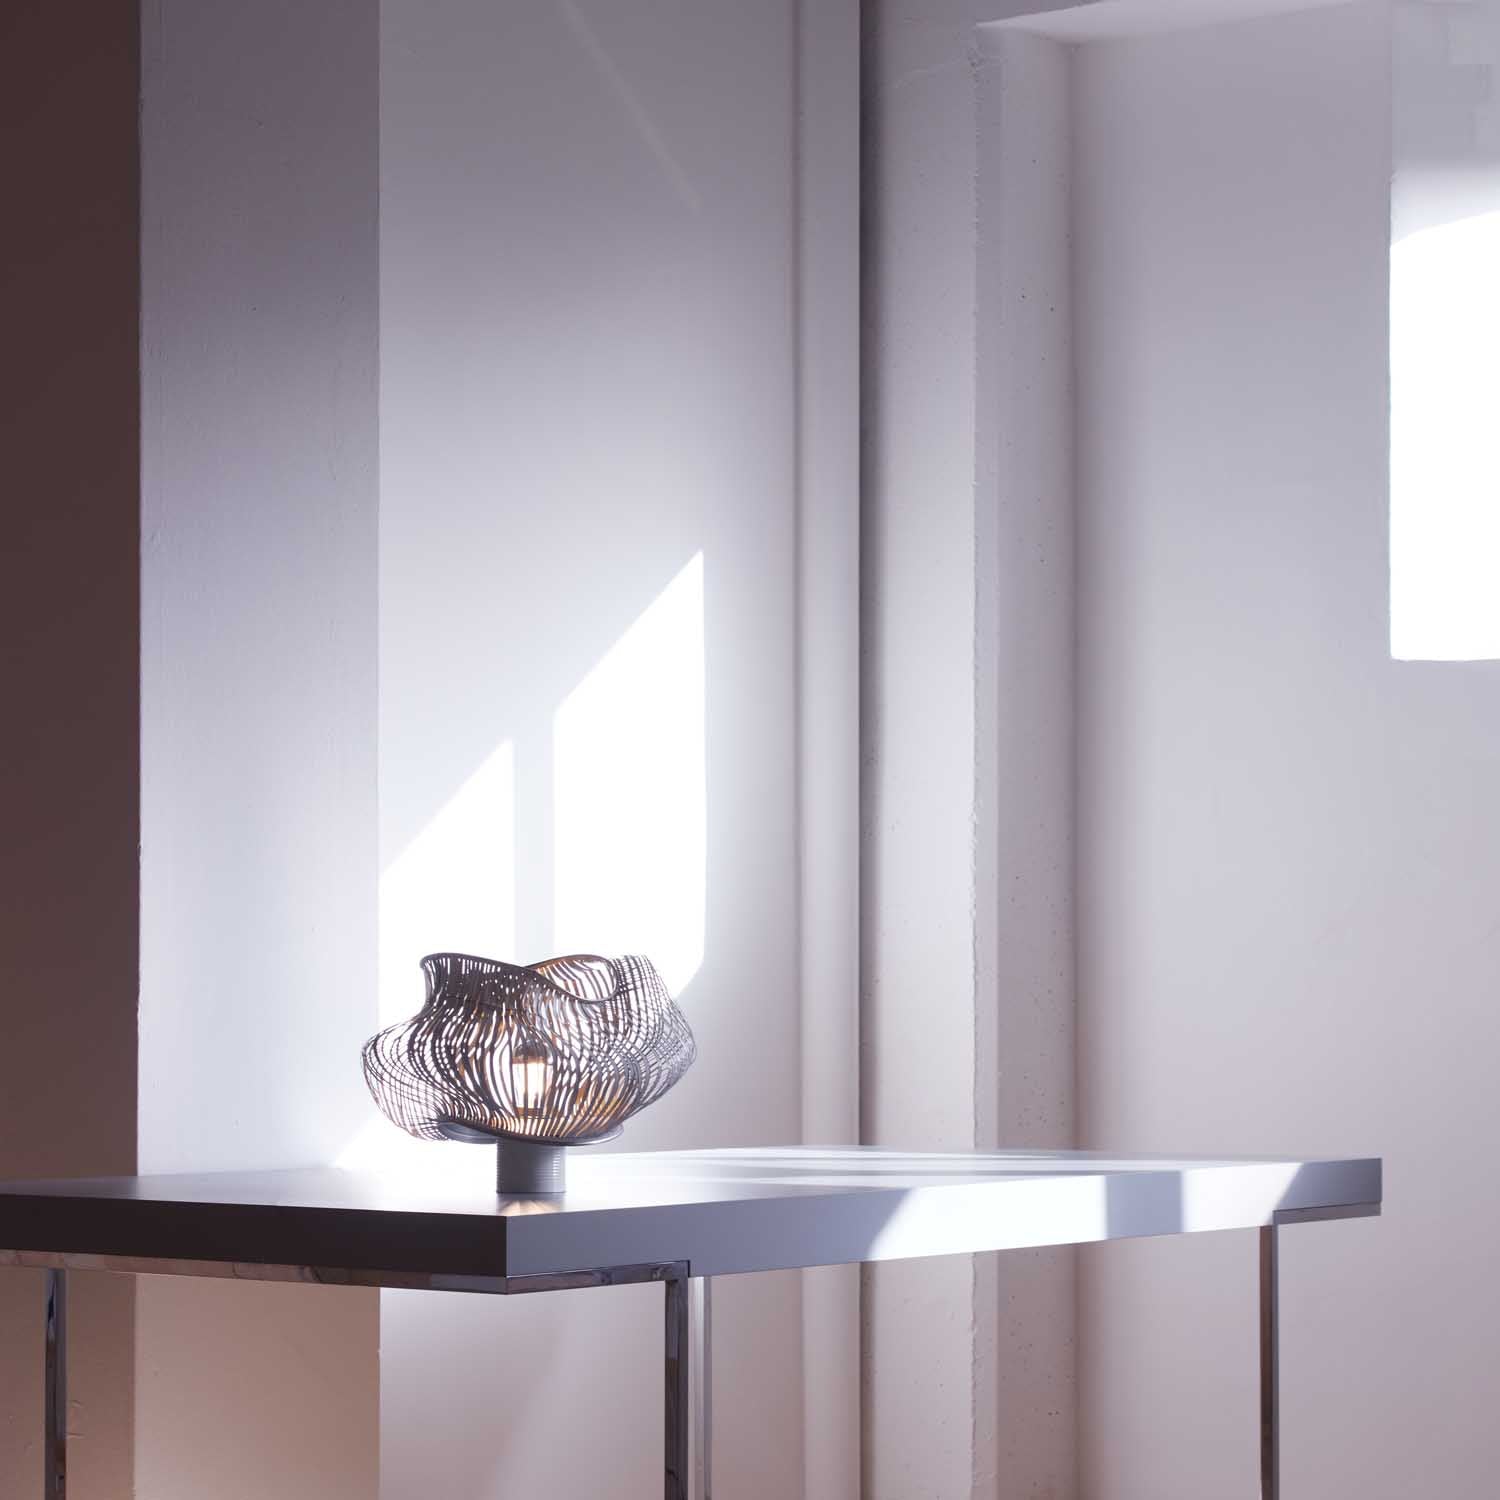 Fuga Table Lamp: Elevate Ambiance with Melodic Glow